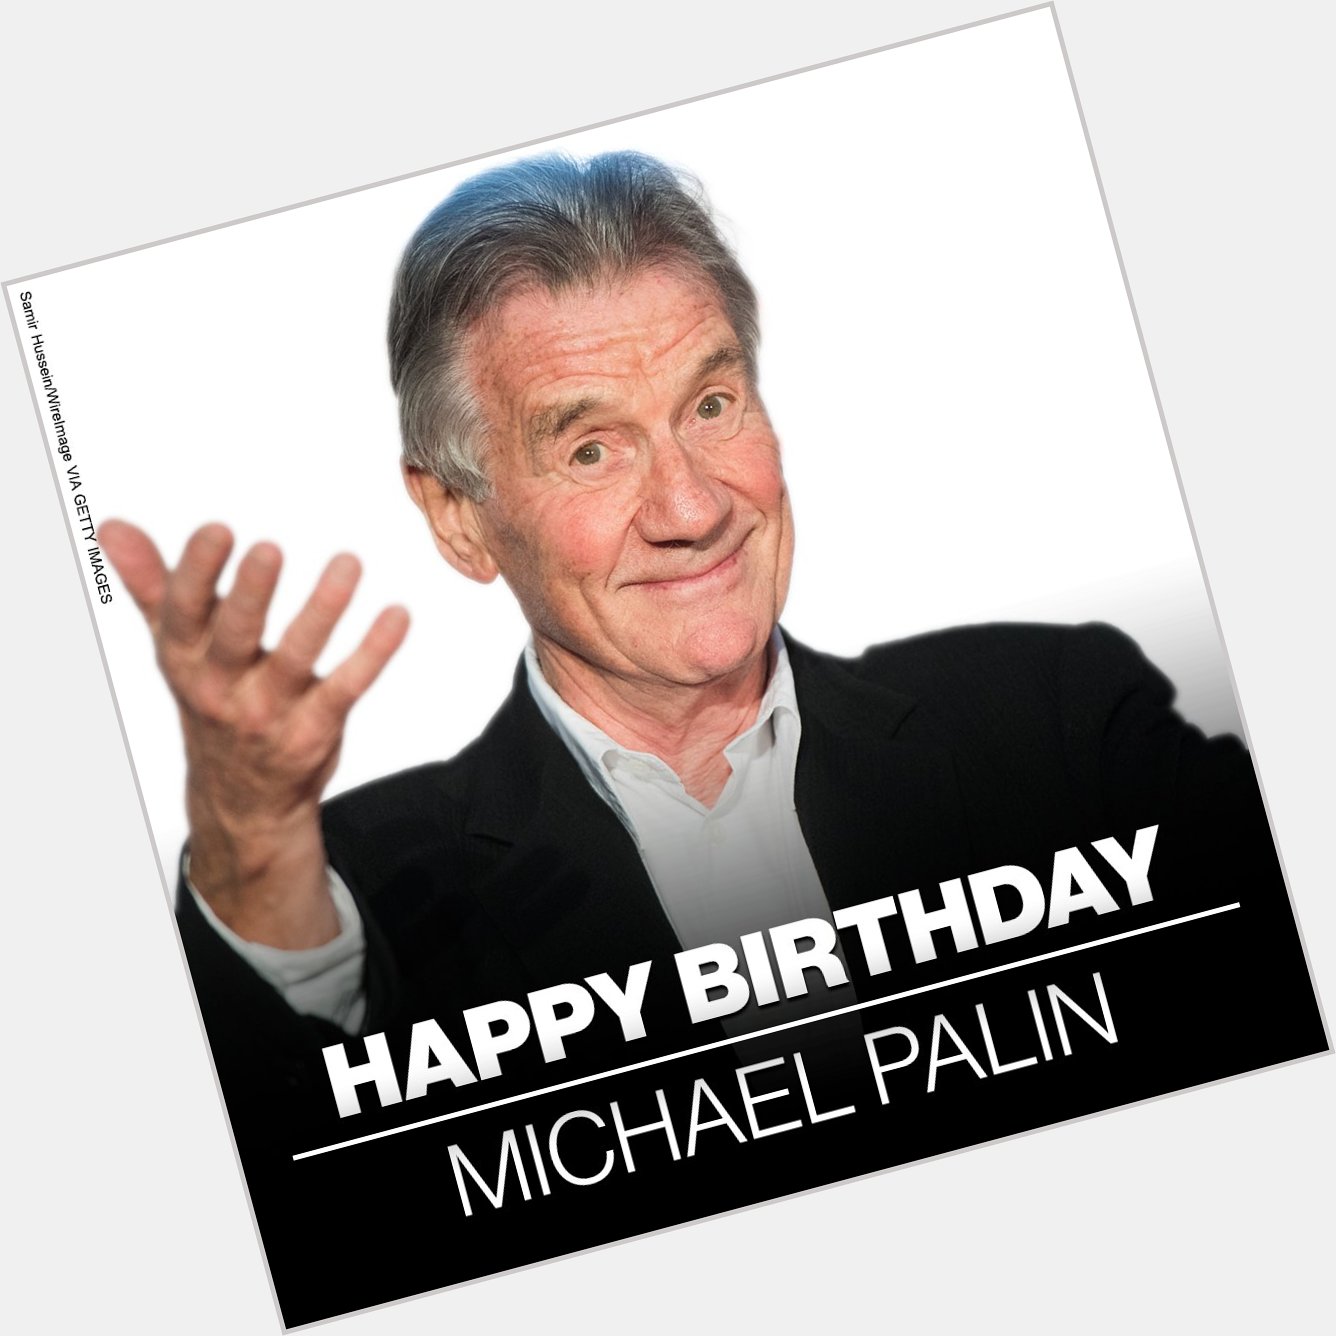 HAPPY BIRTHDAY: Monty Python comedian Michael Palin is 80 today. 